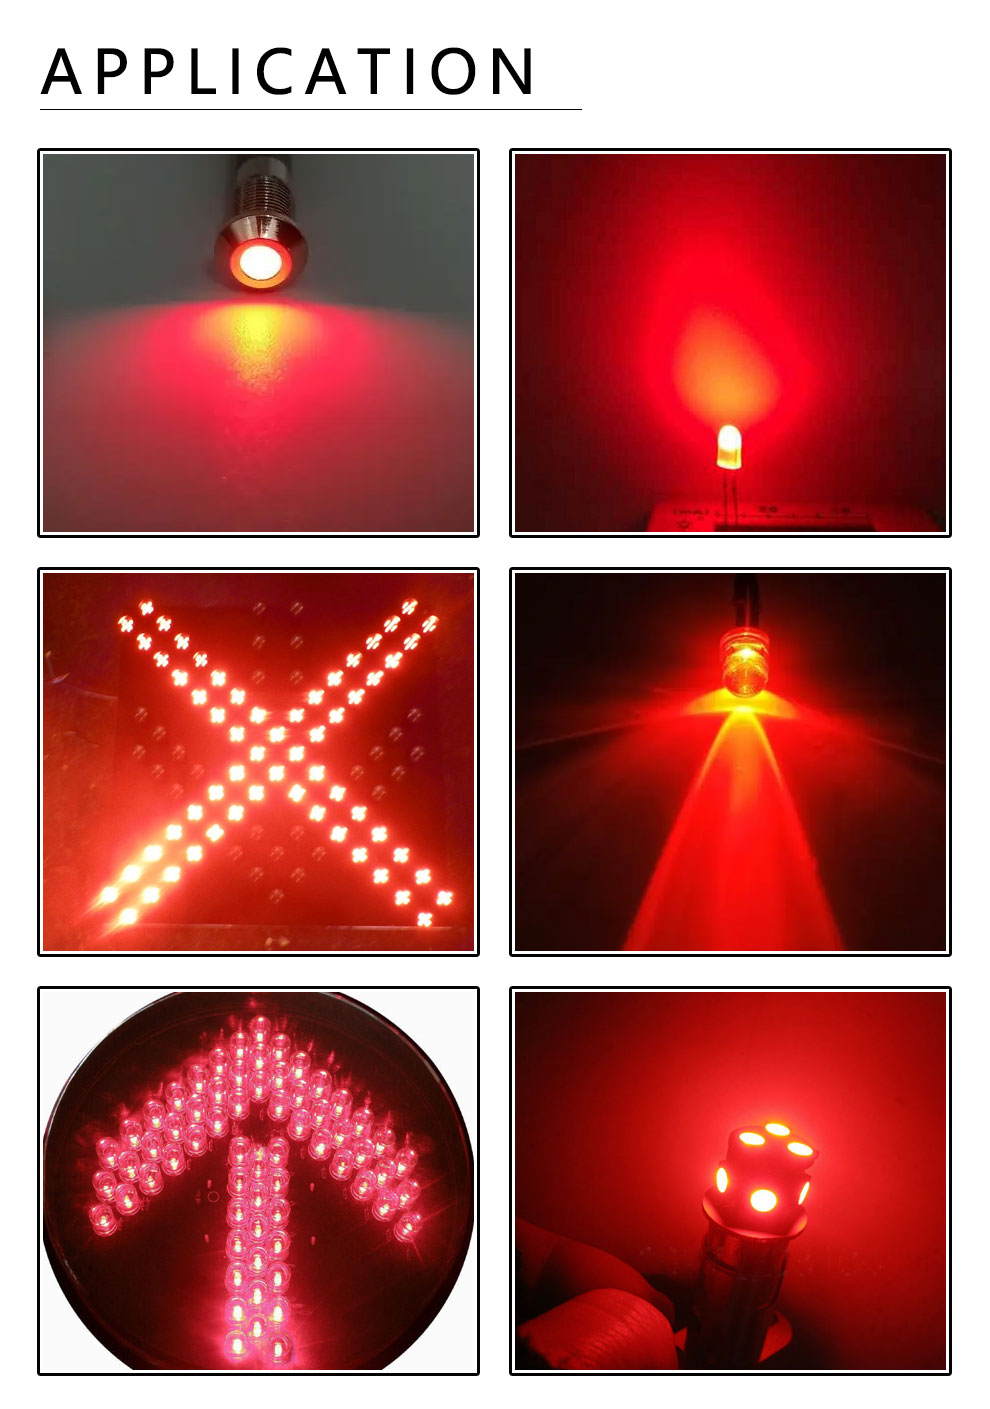 red through-hole LED applicatin